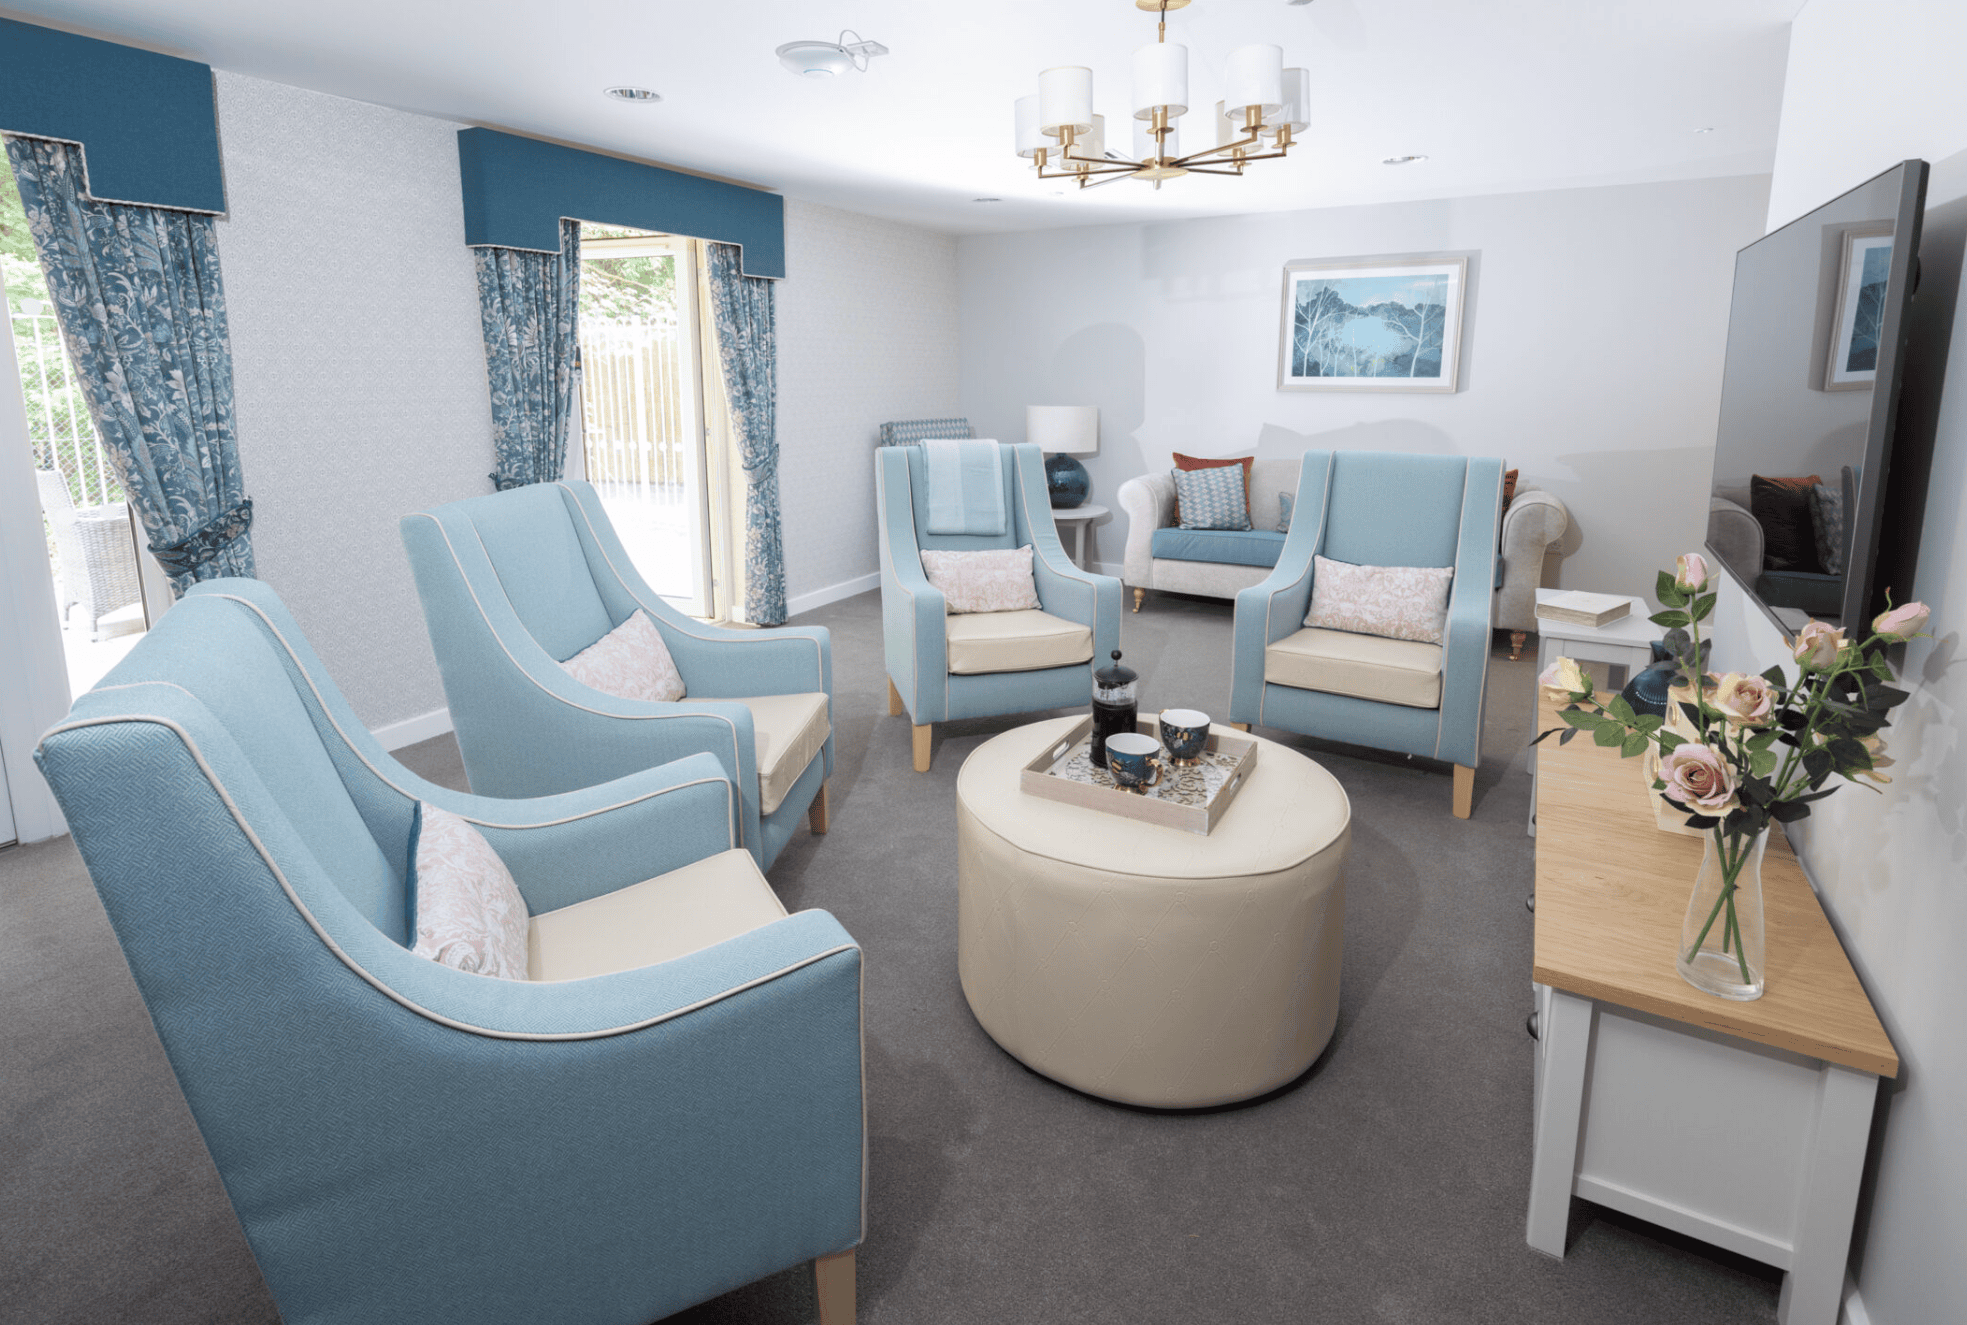 Lounge of Mearns View care home in Glasgow, Scotland